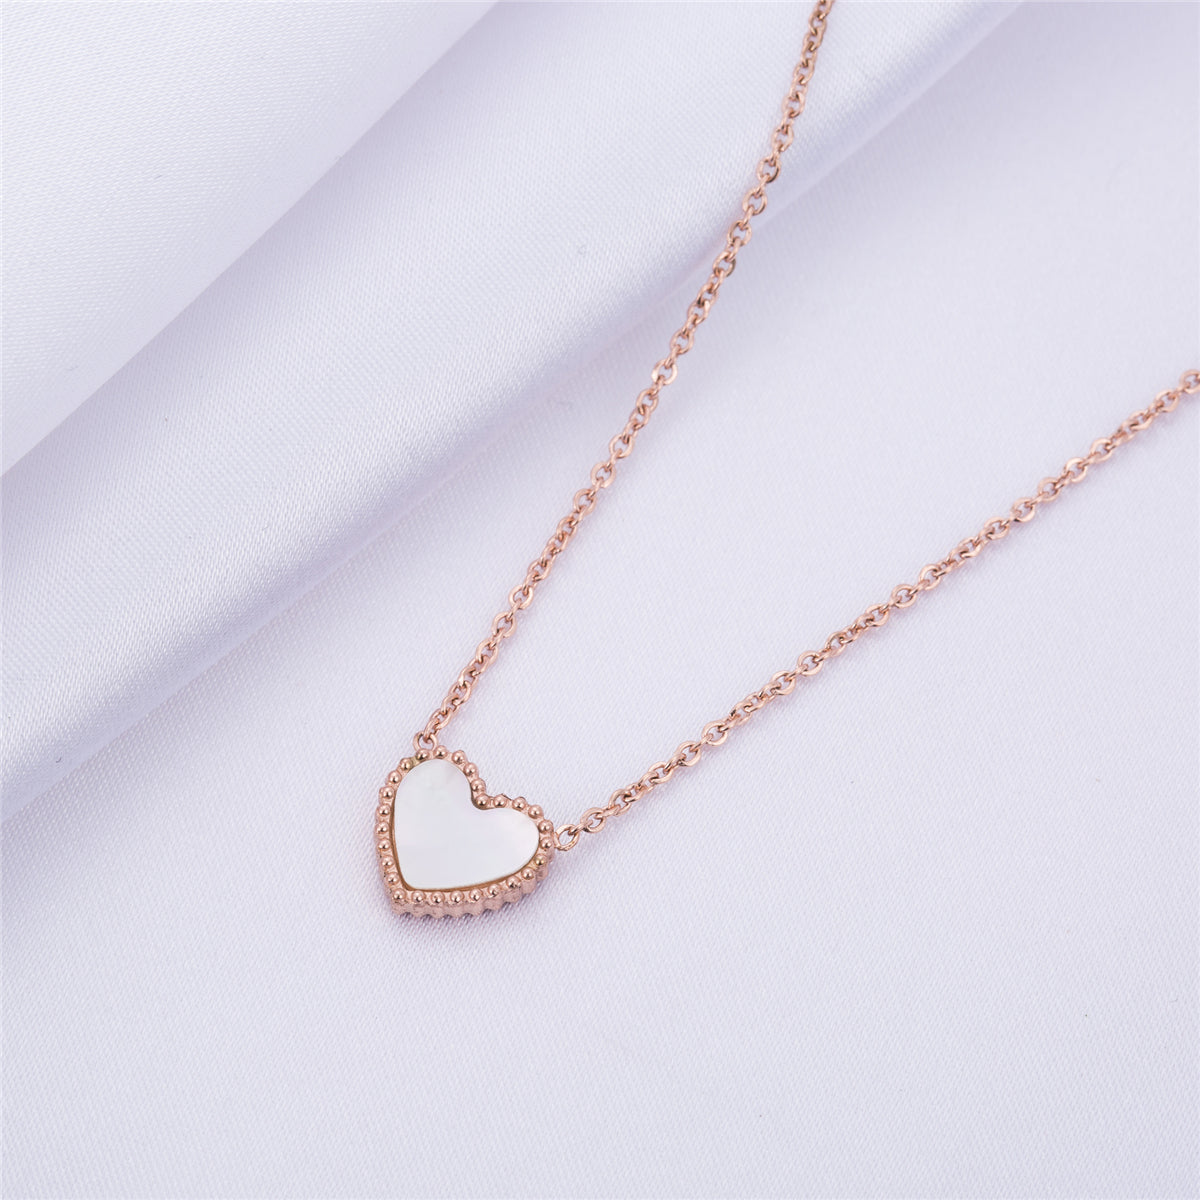 Red & 18K Rose Gold-Plated Heart Pendant Necklace